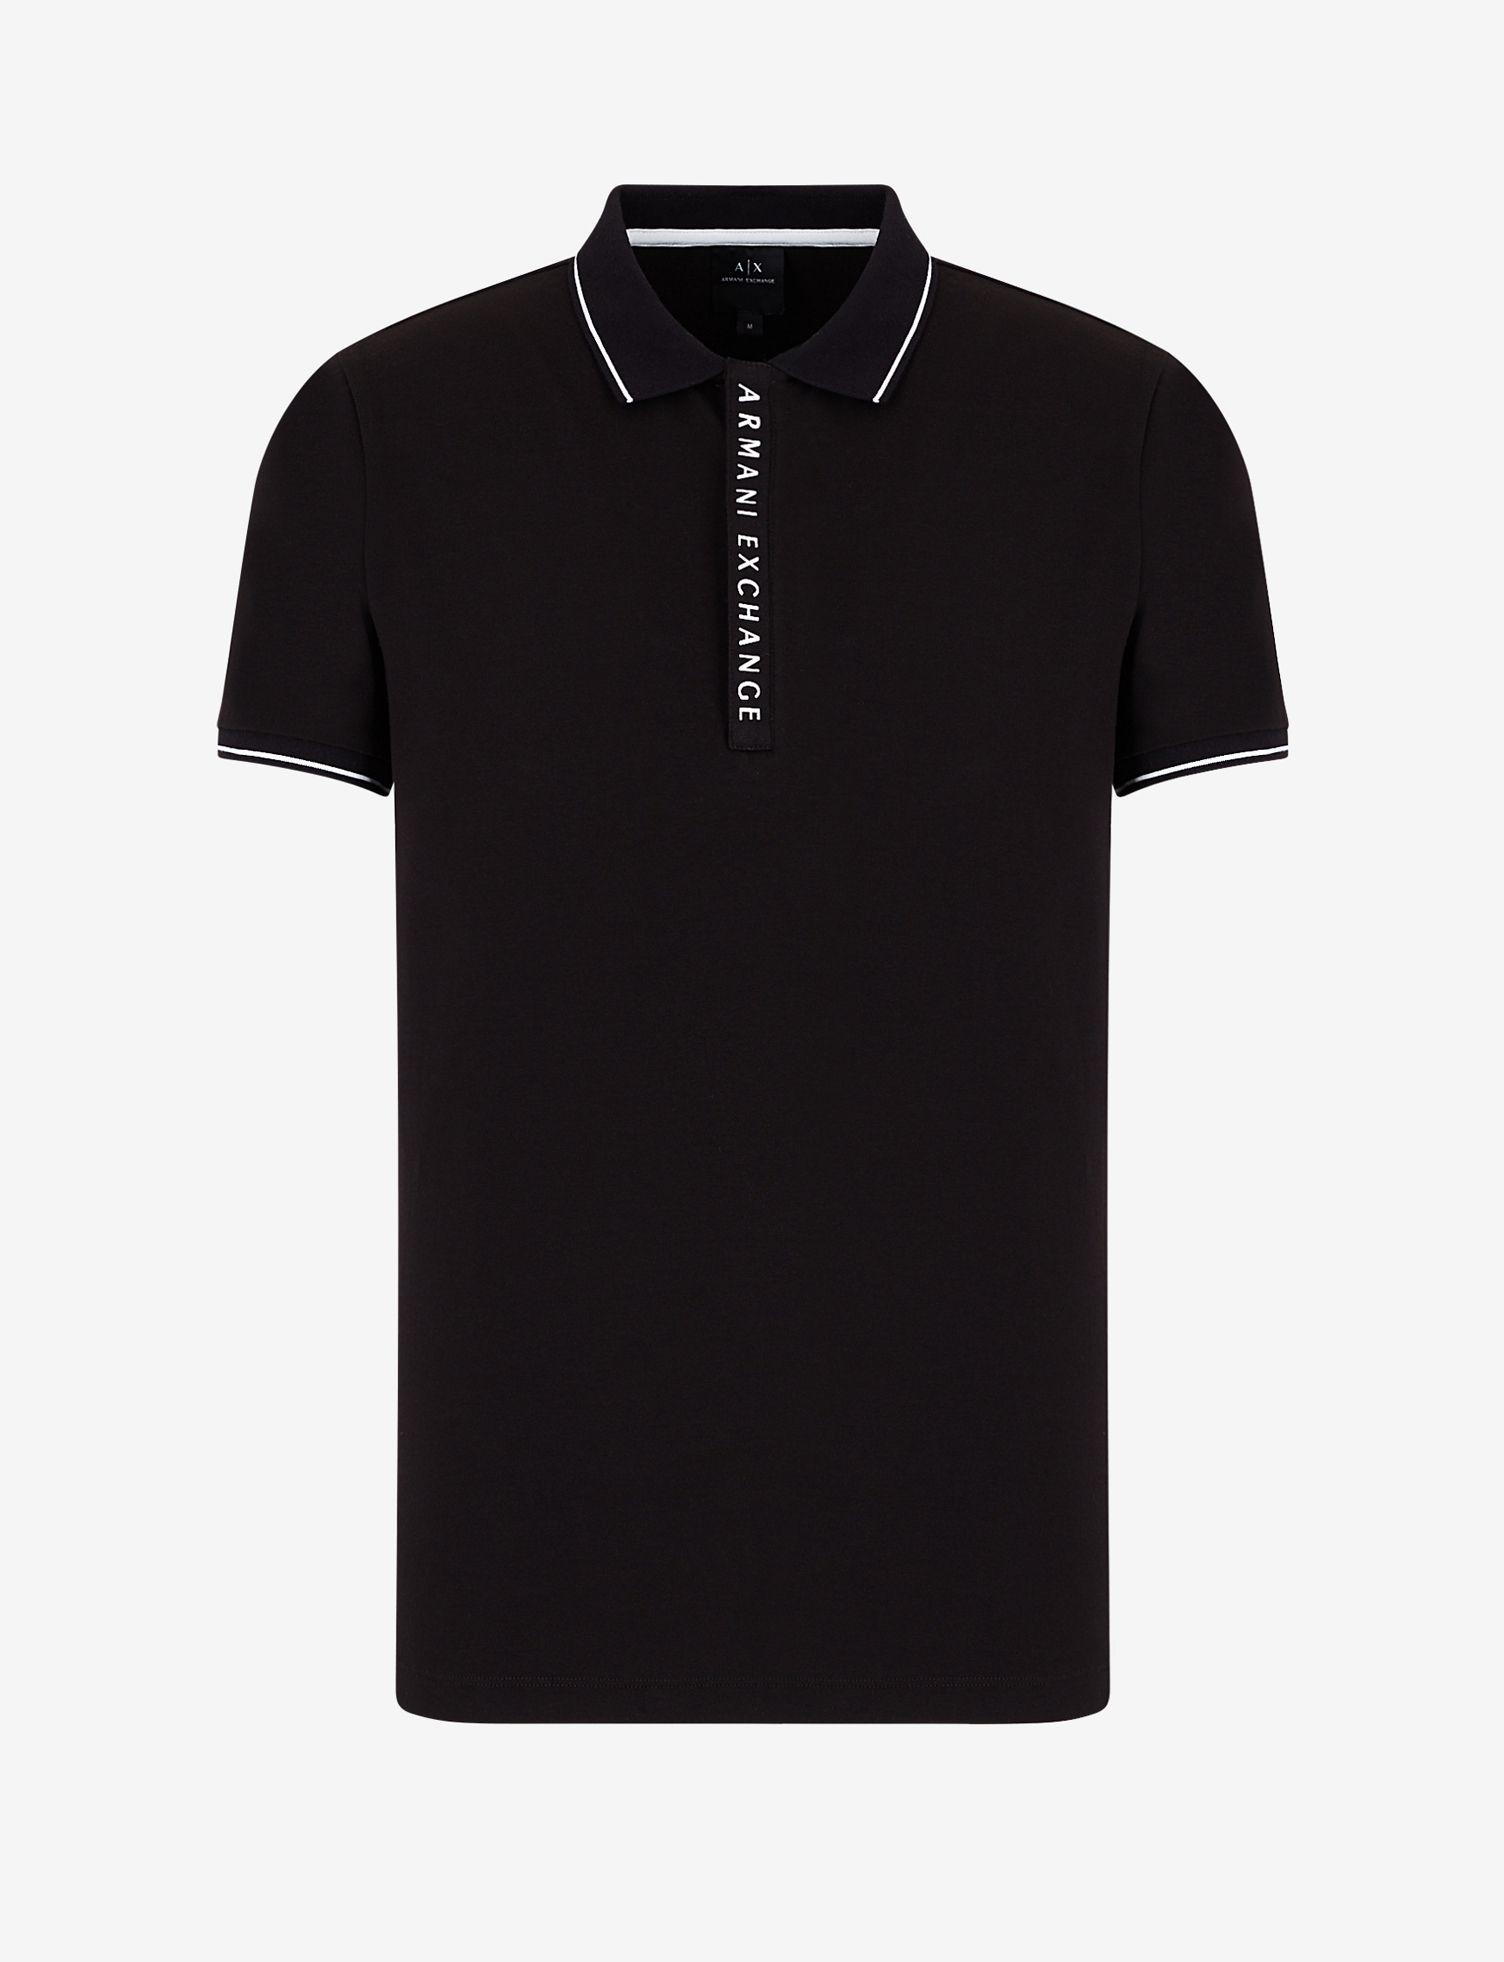 Armani Exchange Cotton Polo With Logo Lettering in Black for Men - Lyst